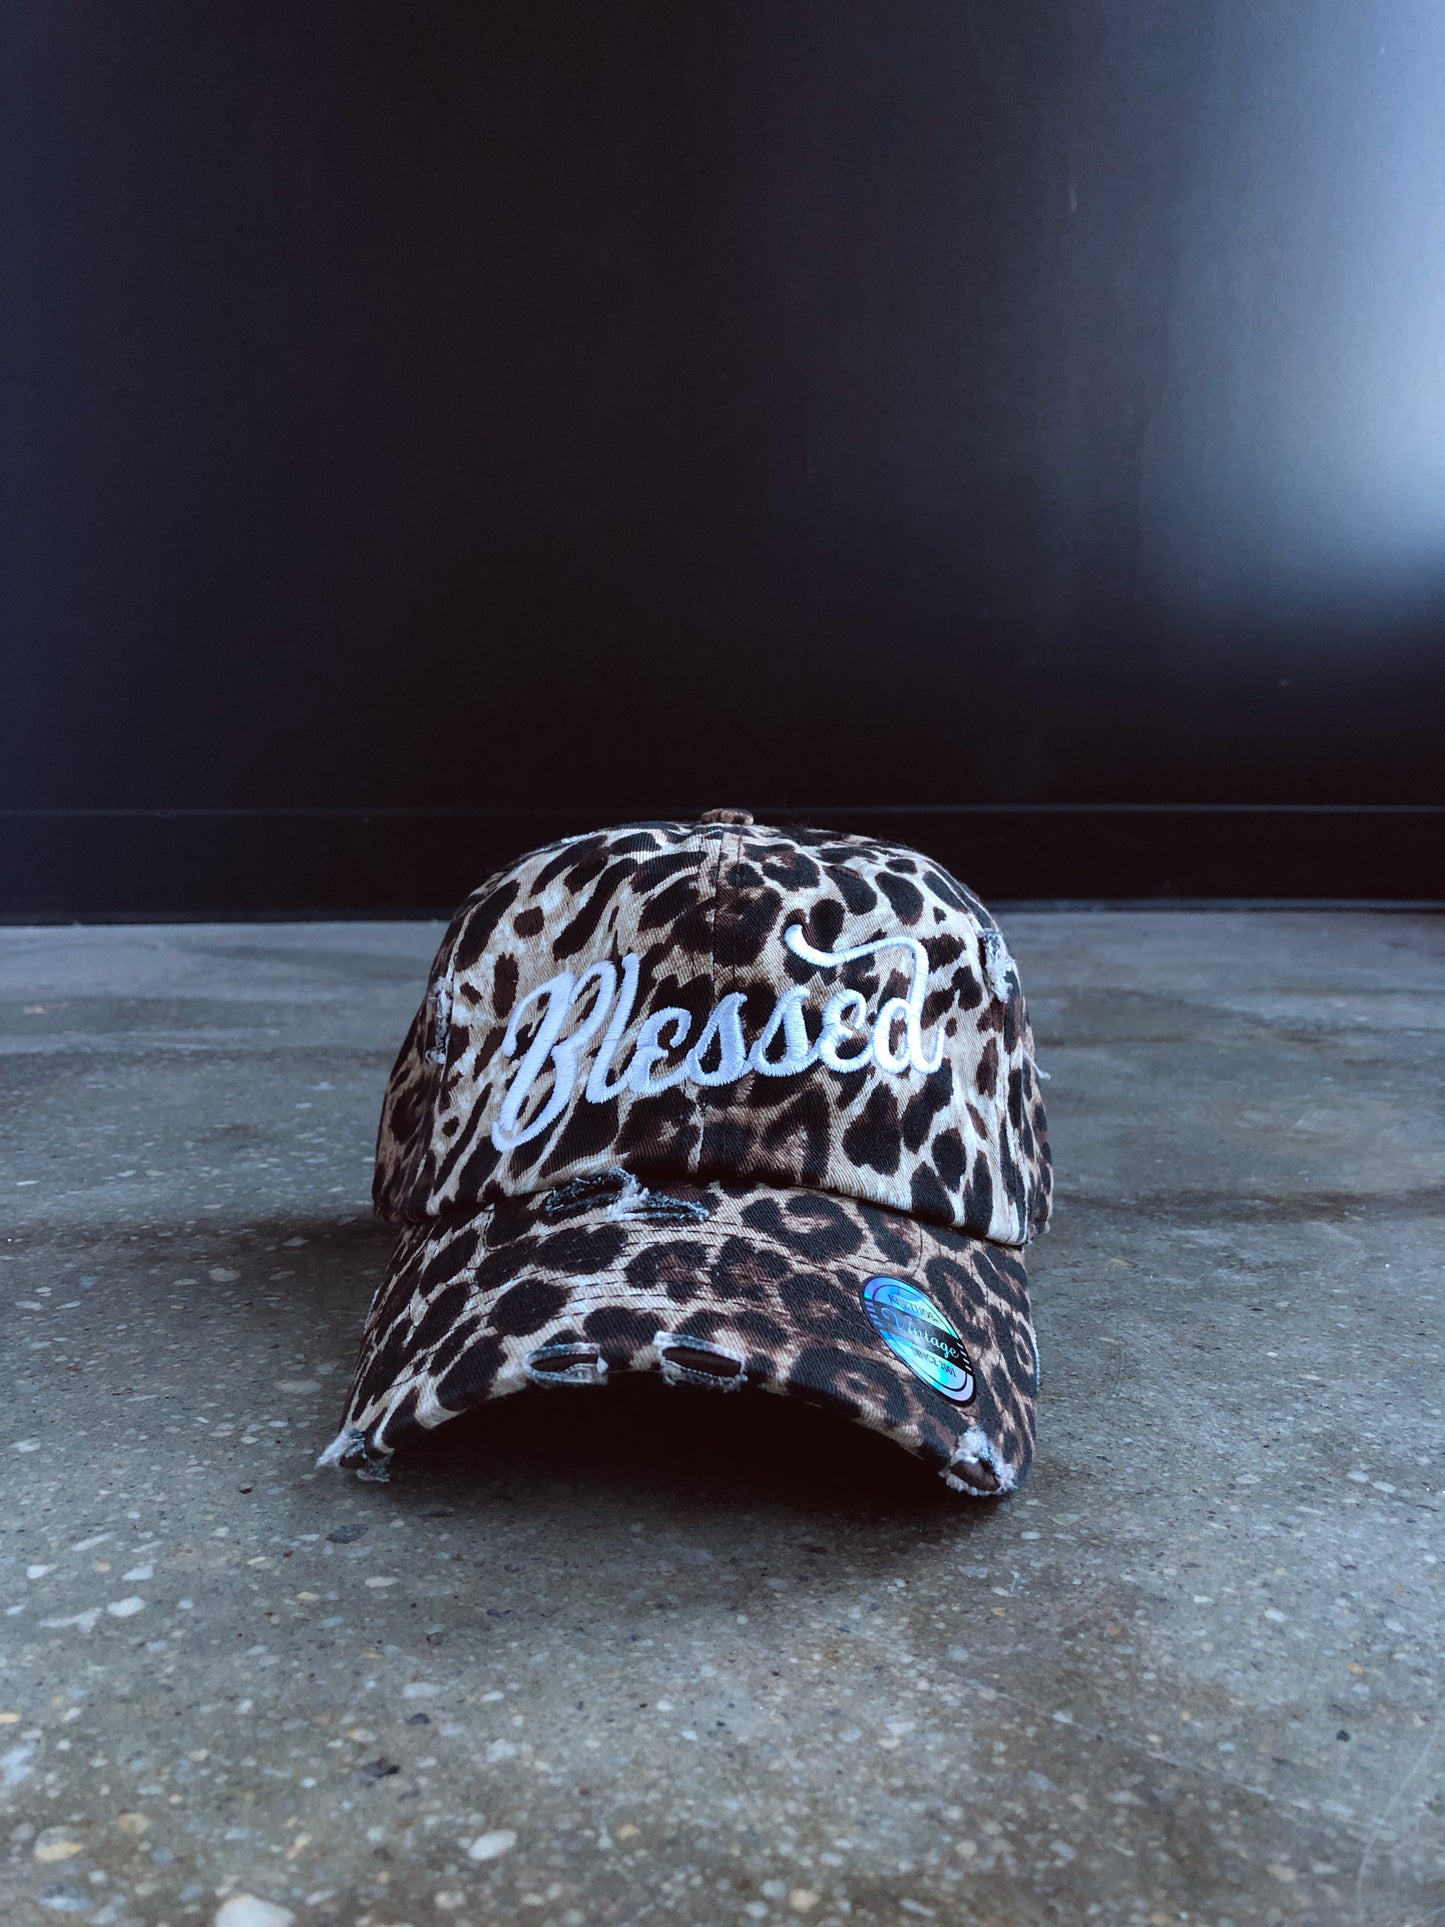 Blessed Hat (Distressed)